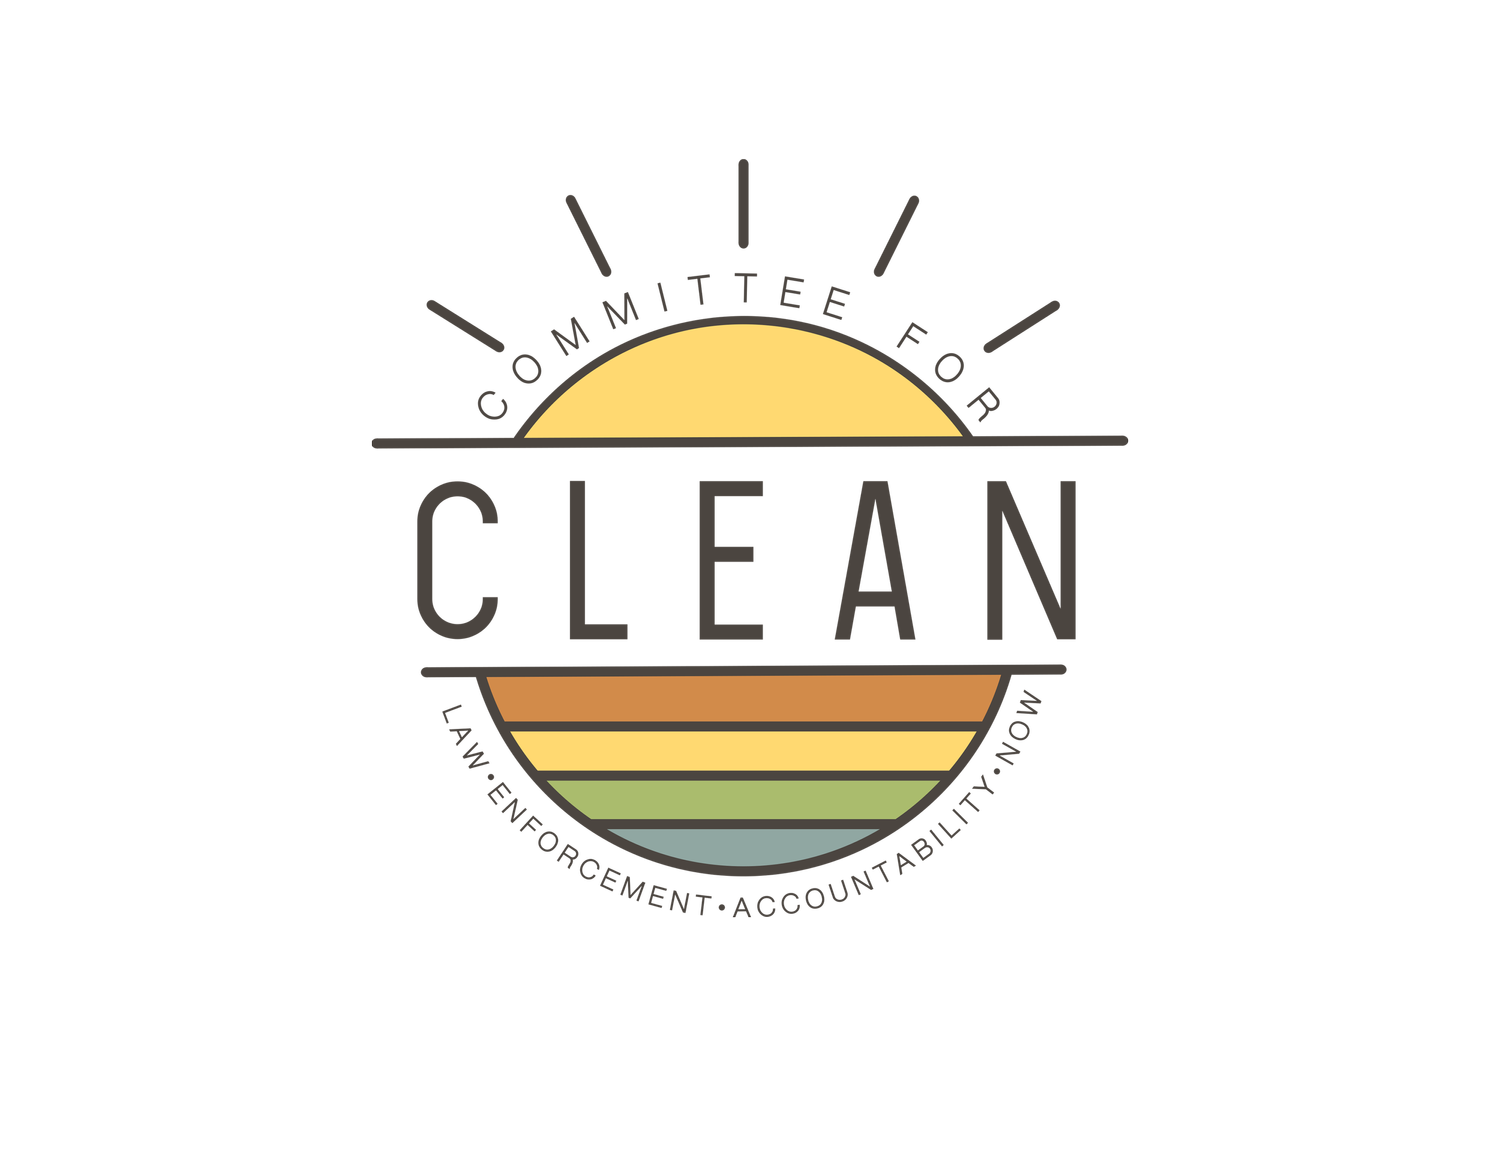 CLEAN - Committee for Law Enforcement Accountability Now logo